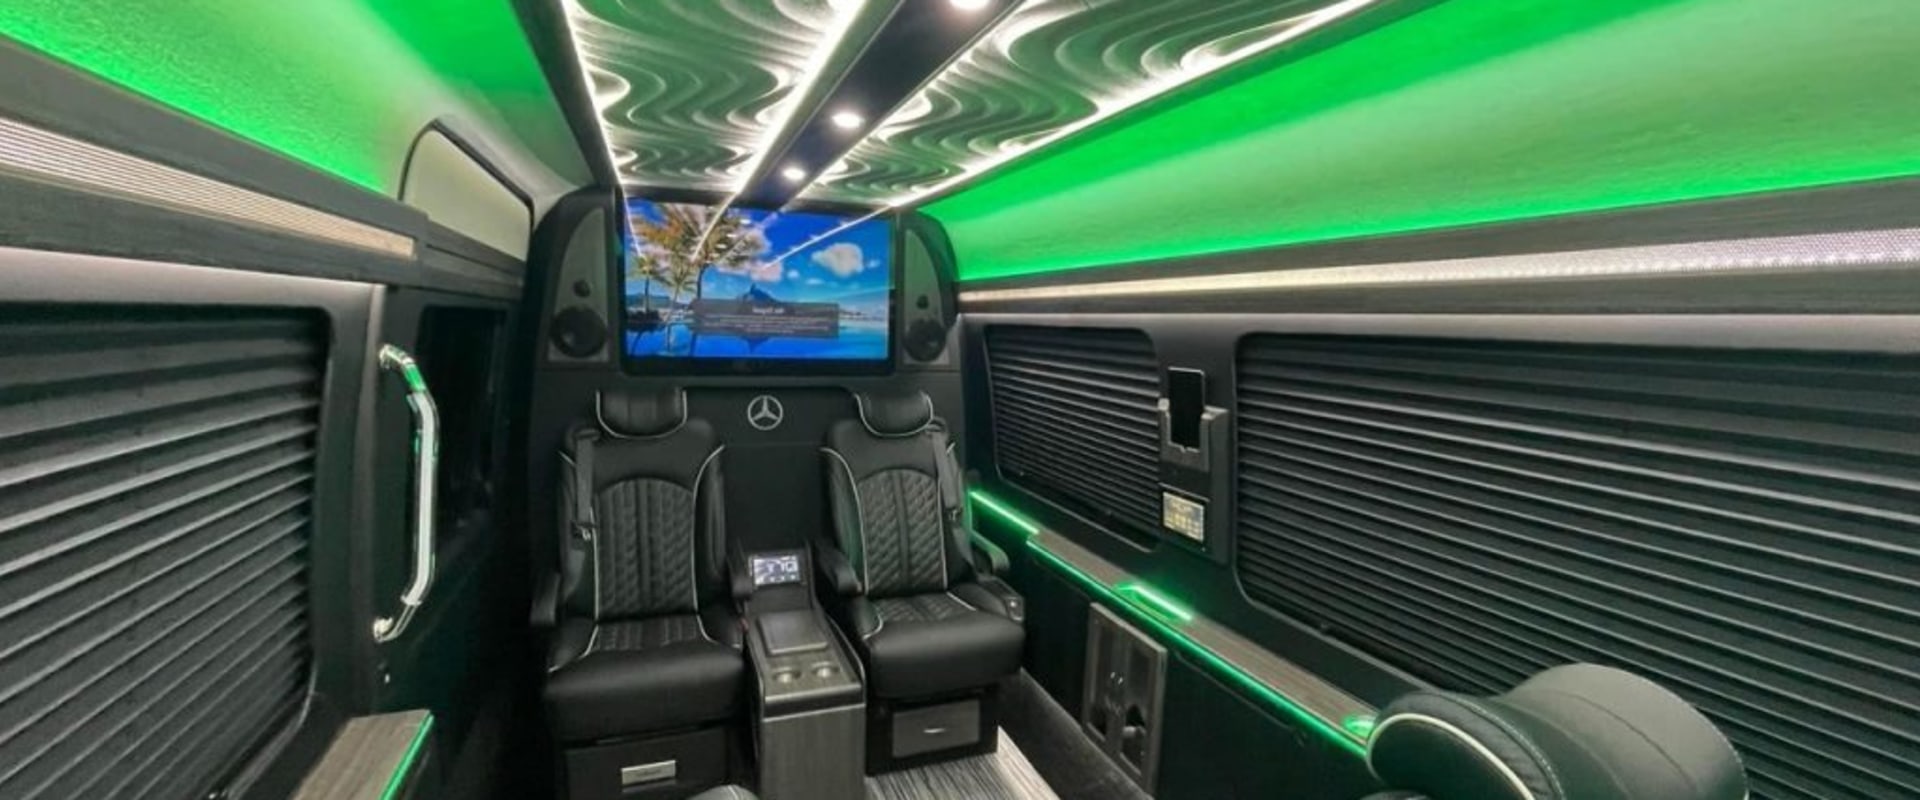 San Diego Limo Service: The Perfect Blend of Comfort and Tech